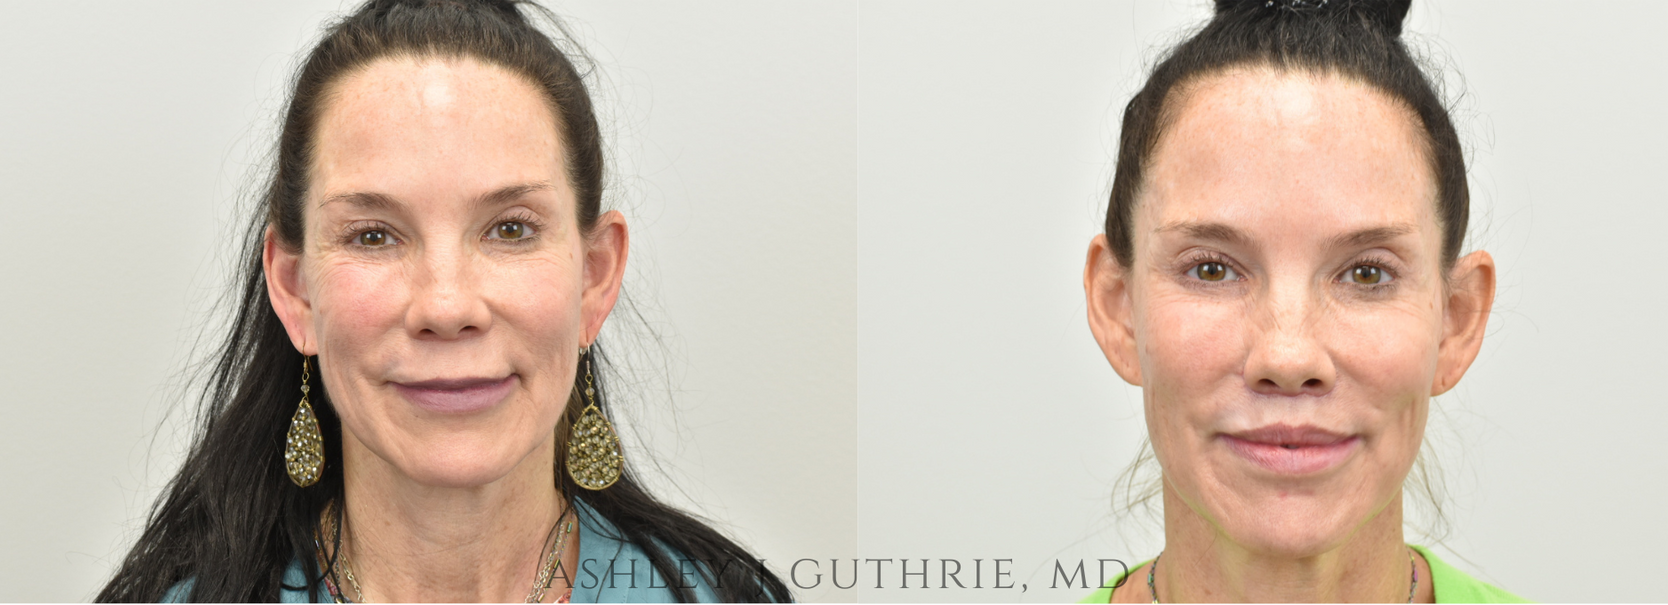 Lip Lift by Ashley Guthrie MD - Facial Plastic Surgeon